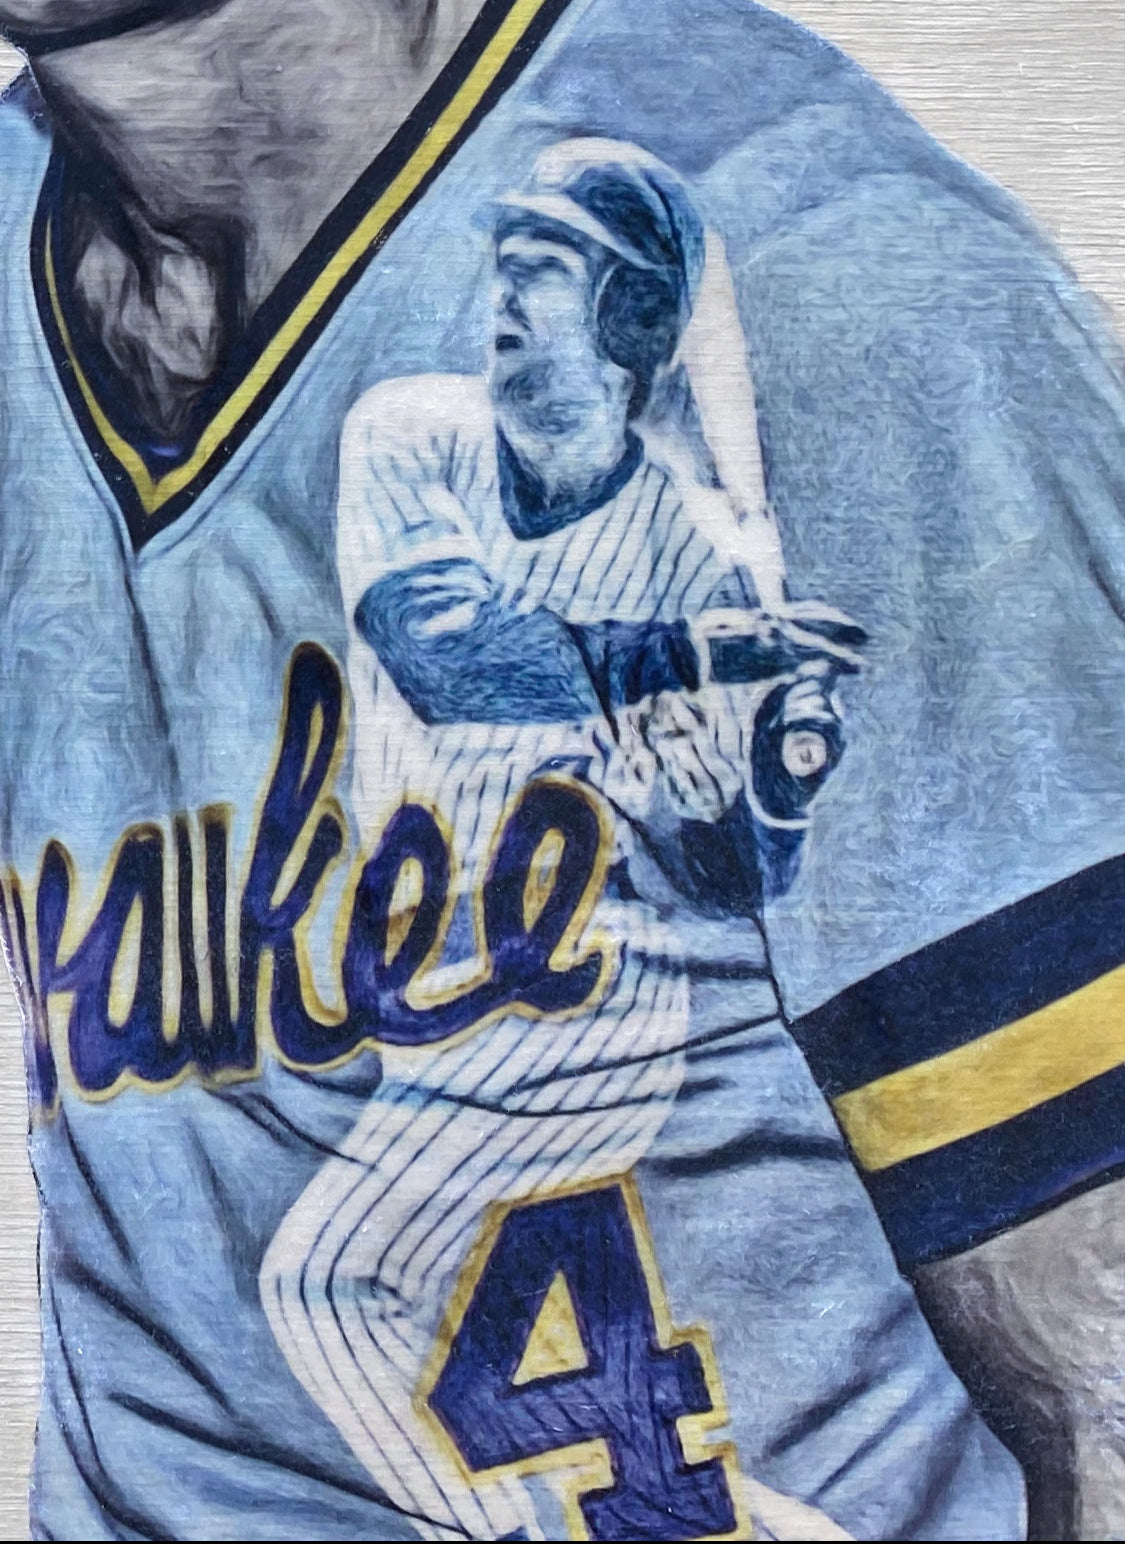 "Yount and Molitor” (Robin Yount and Paul Molitor) Milwaukee Brewers - 1/1 Original on birchwood